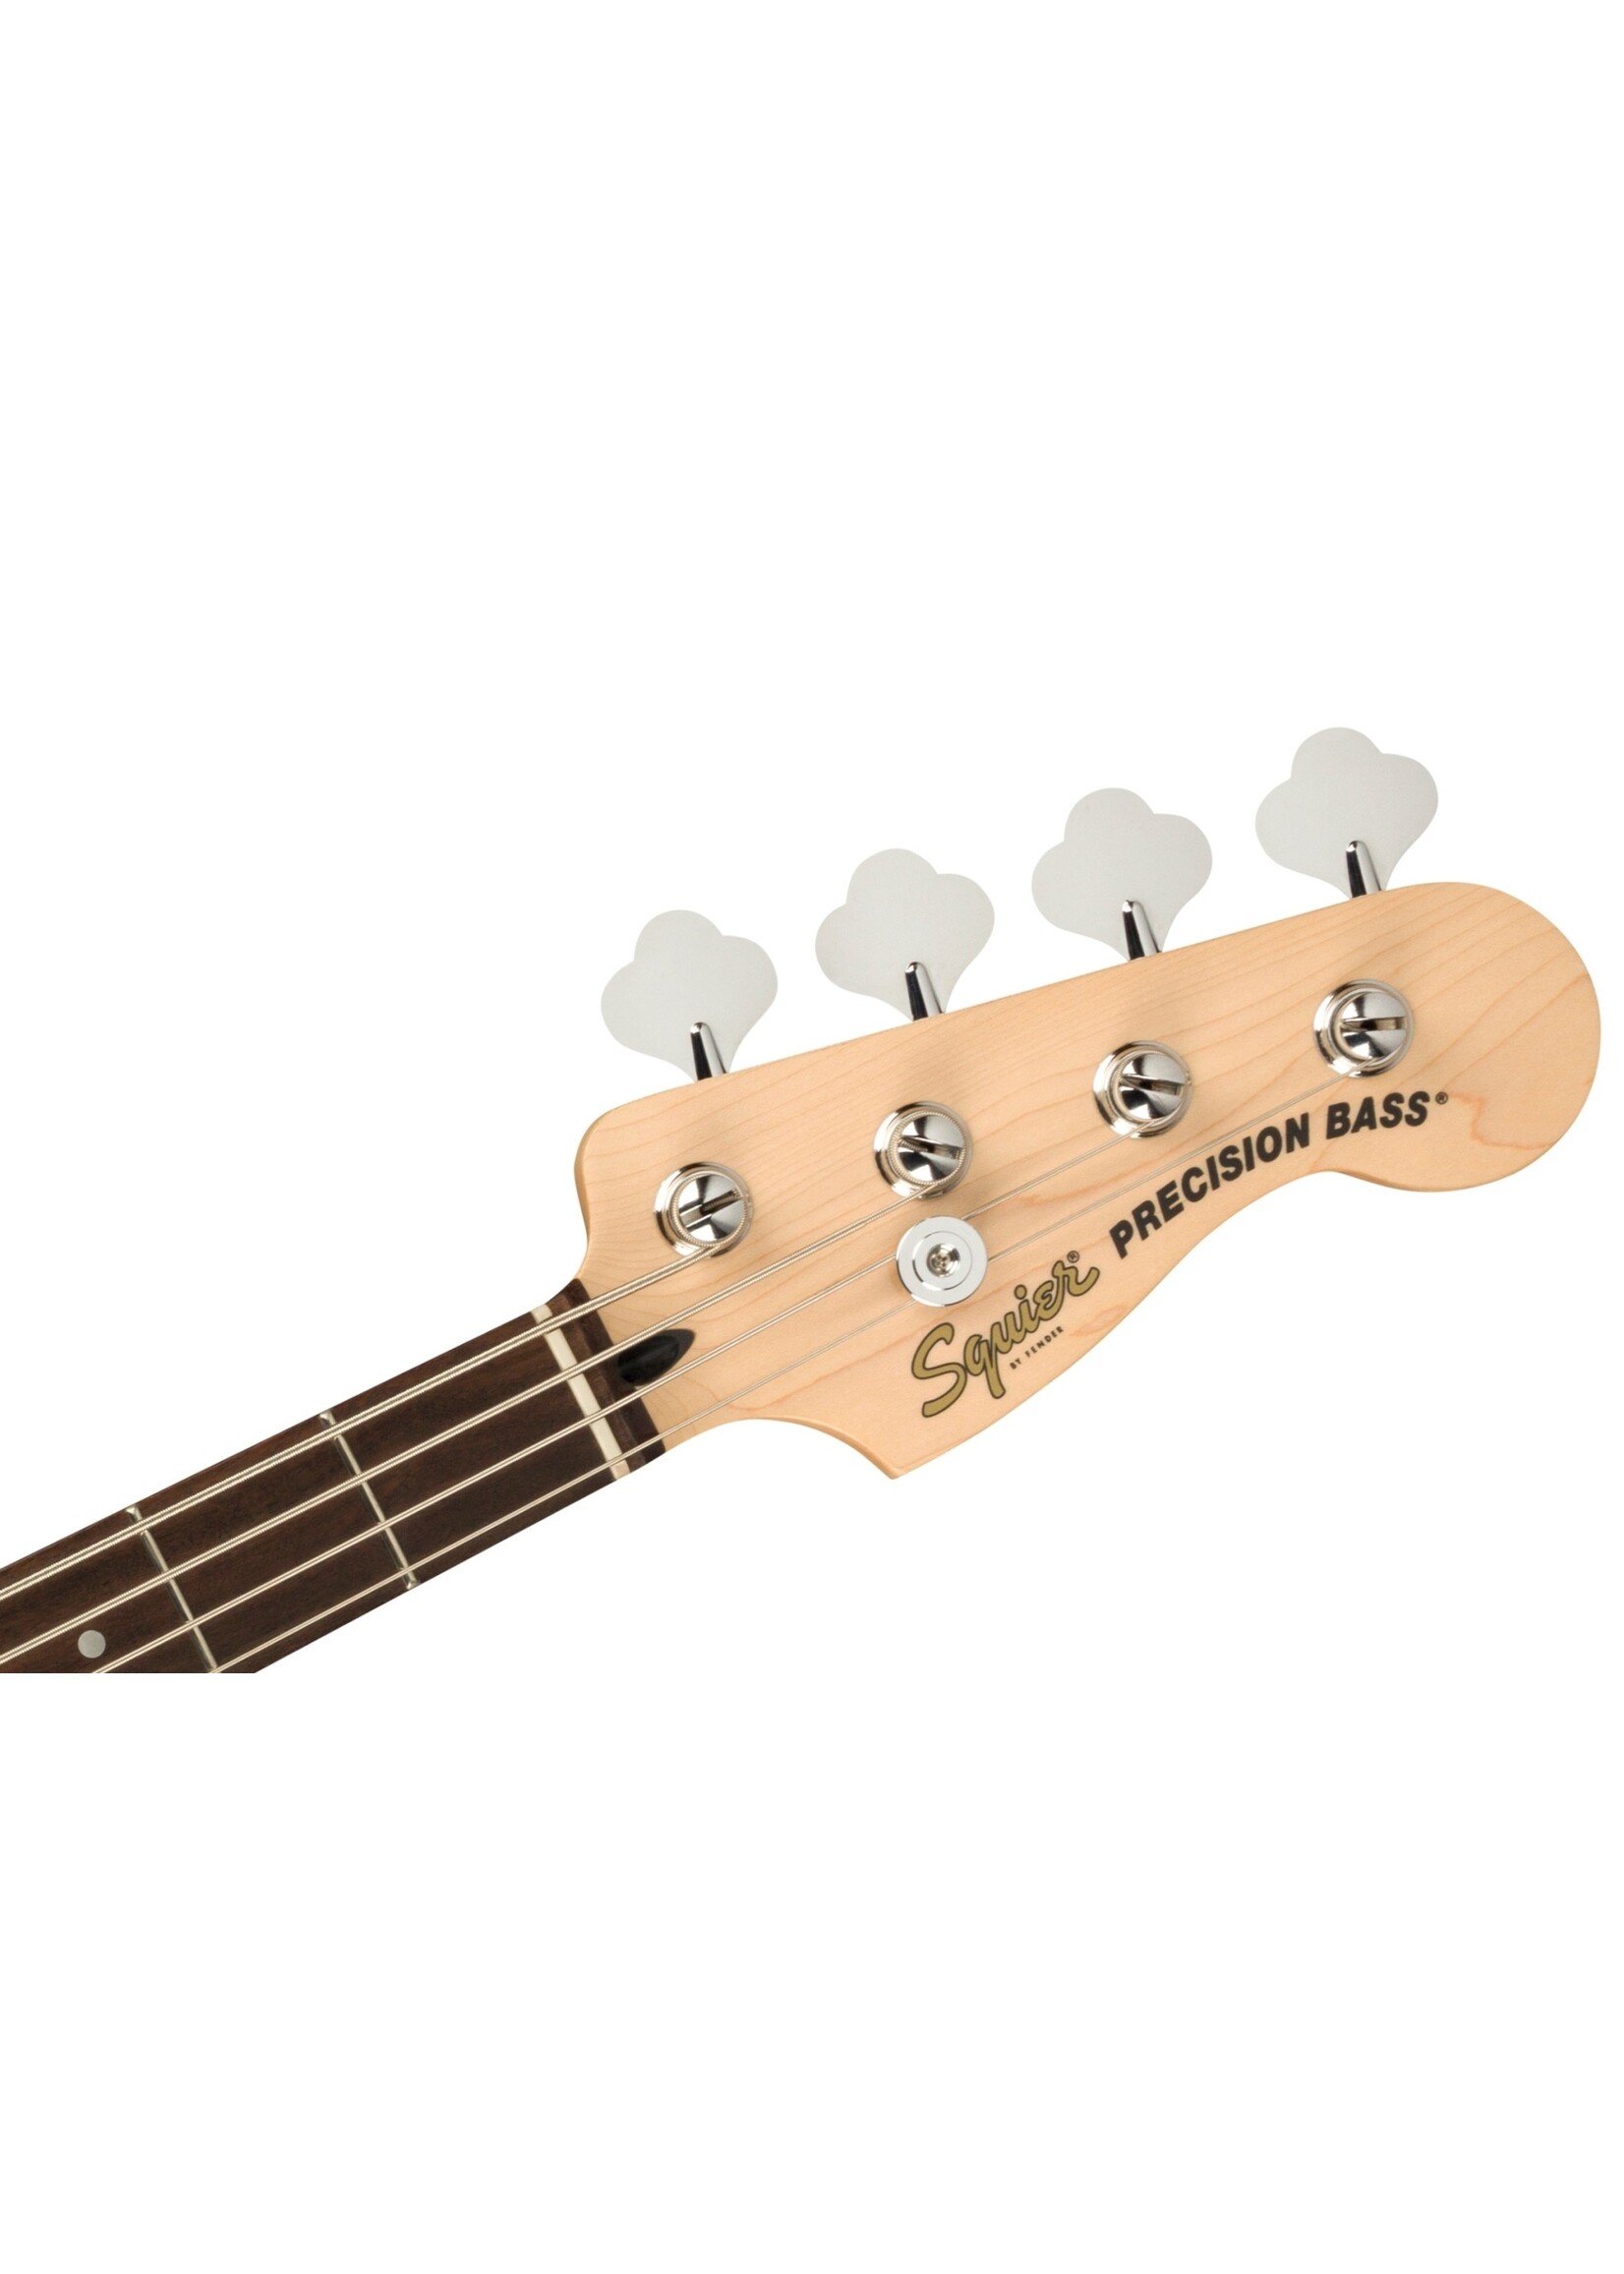 Squier Squier Affinity Series Precision Bass PJ Pack, Maple Fingerboard, Black, Gig Bag, Rumble 15 - 120V